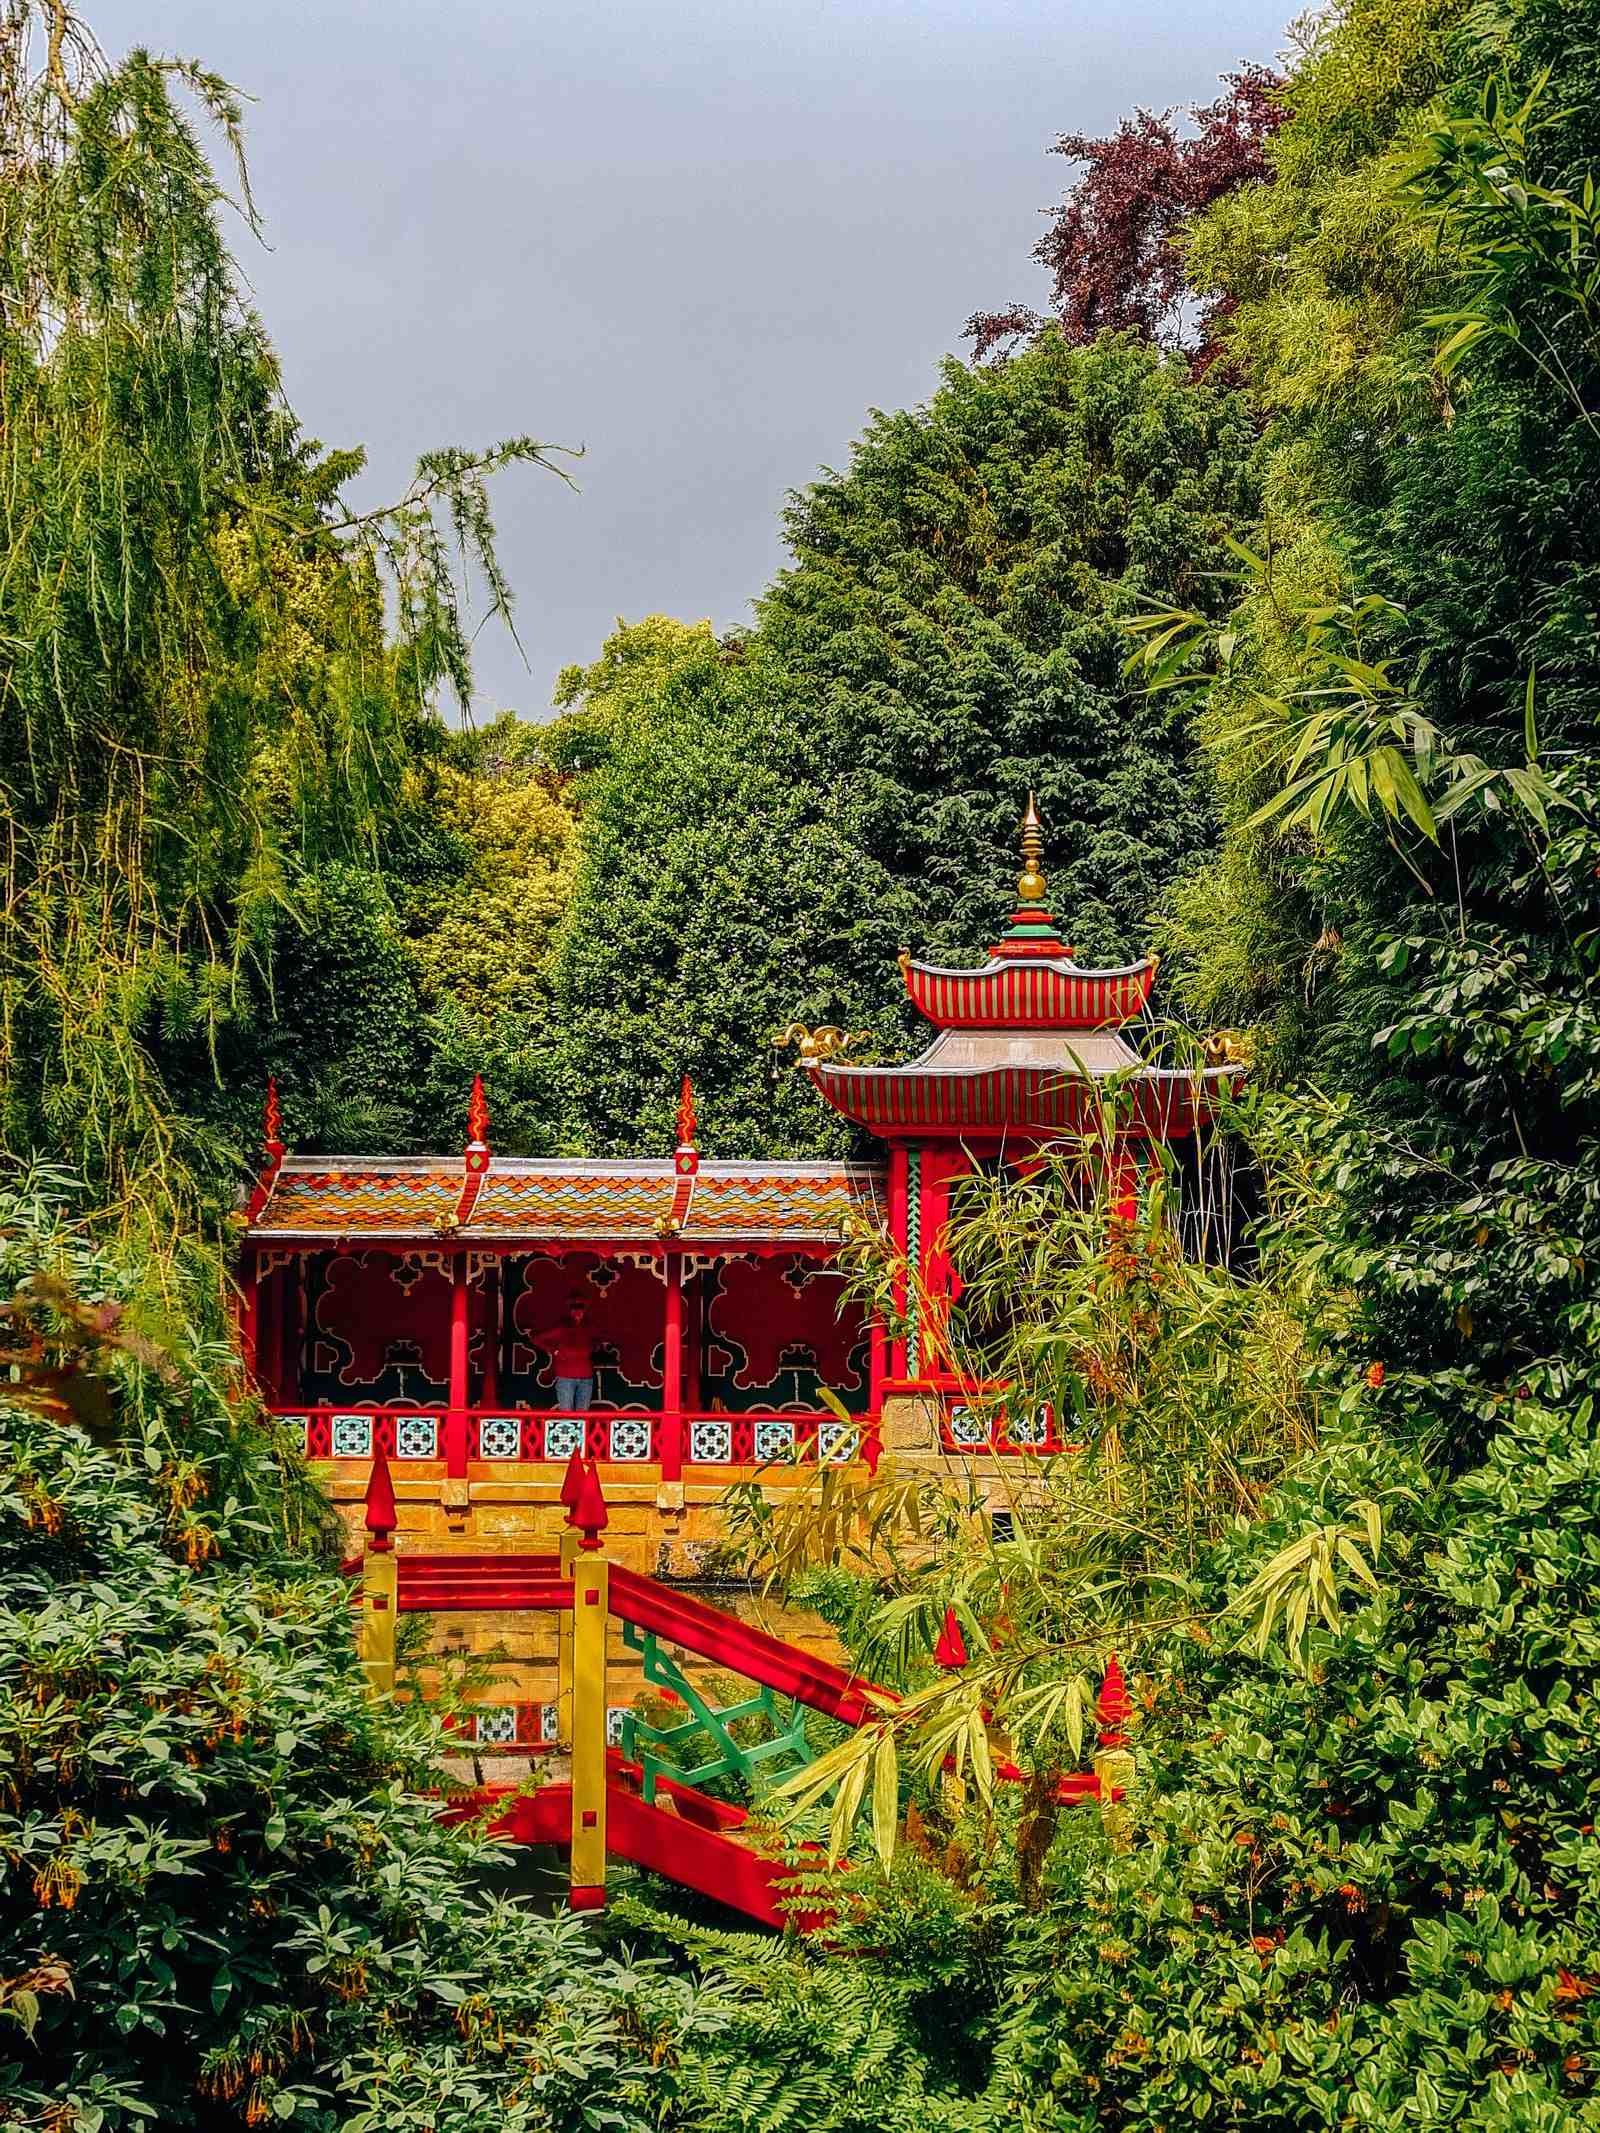 an asian style red and yellow pagoda surrounded by greenery in lush gardens at Biddulph Grange National Trust on a day out near Nottinghamshire